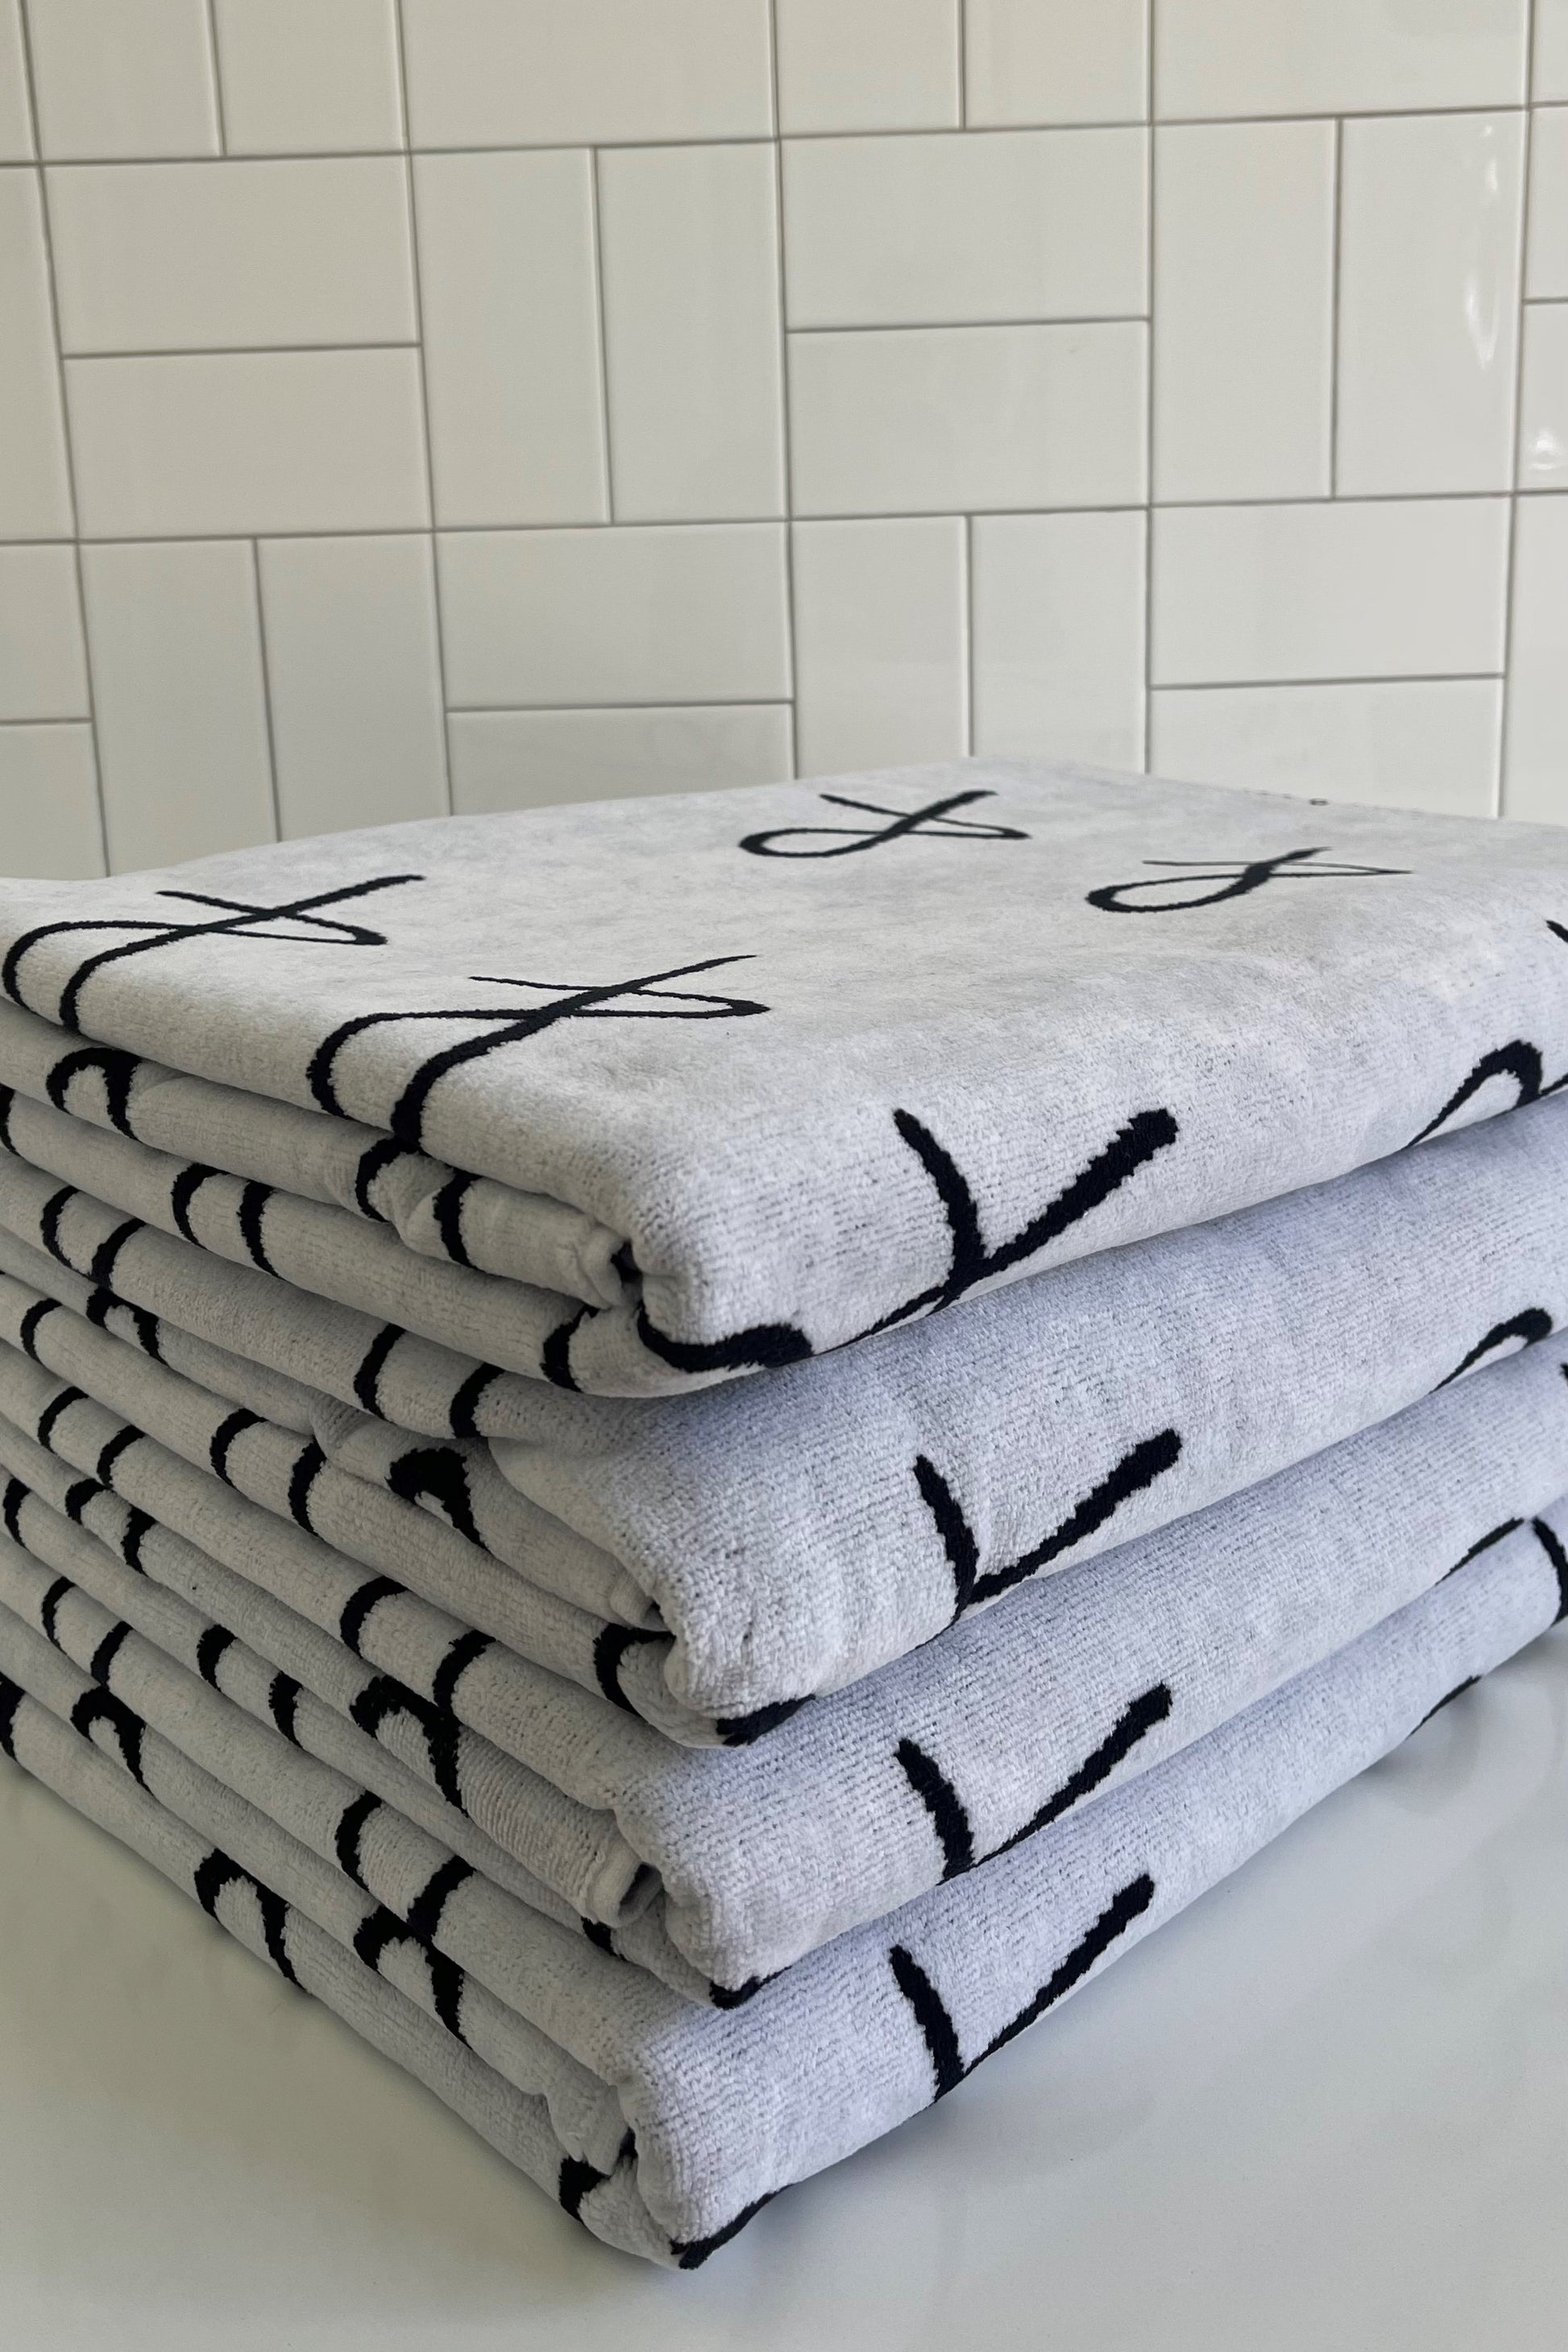 High Quality 100% Absorbent Extra Soft Louis Vuitton Branded White Cotton  Bath Towel